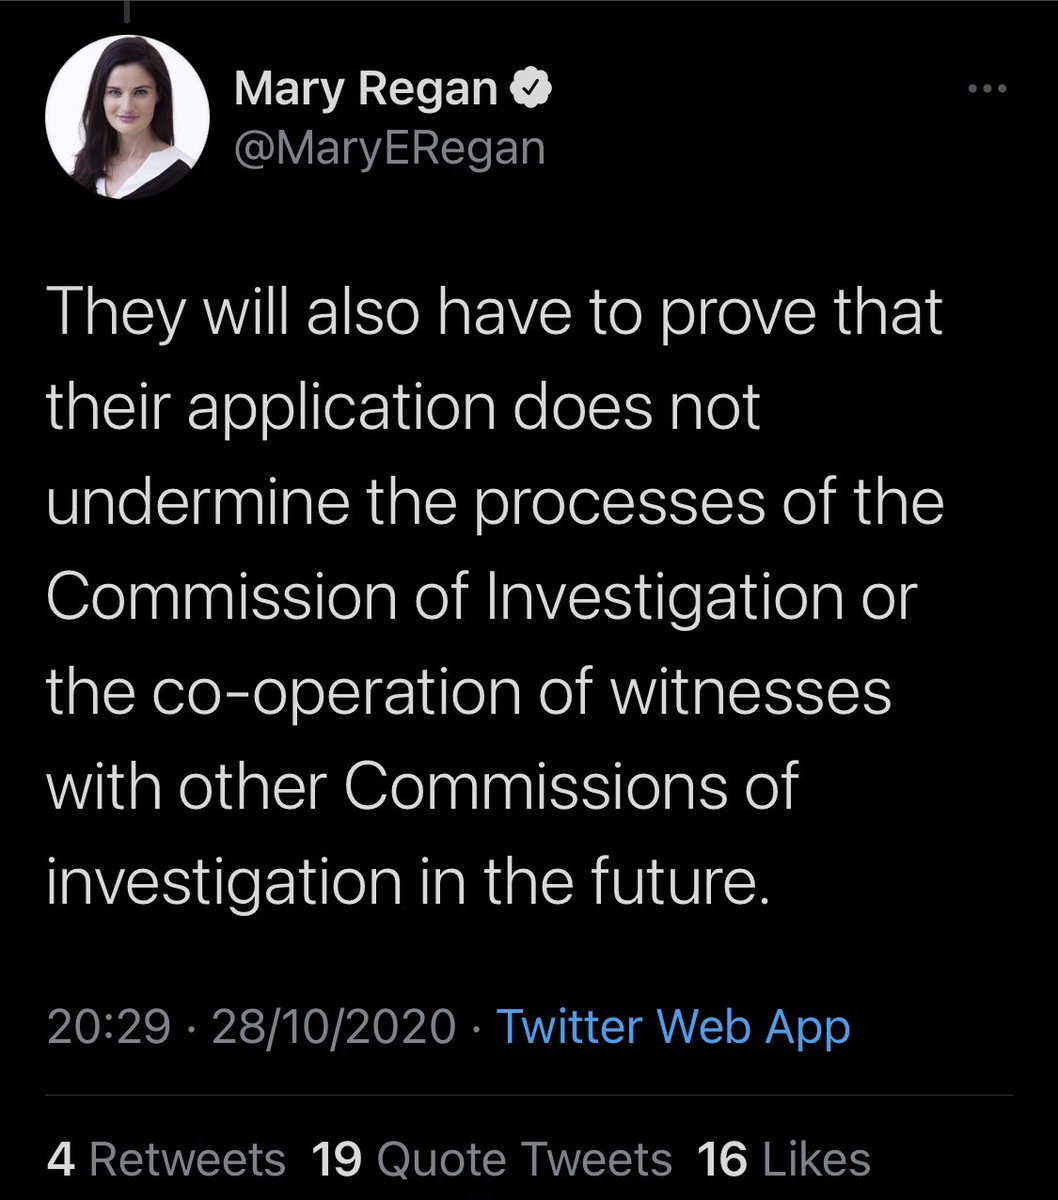 Considering blowing this up and building an entire Barnum-style Museum of Legal Madness around it.You can only have your data if you prove what people in future hypothetical Commissions will do if they know you got it.